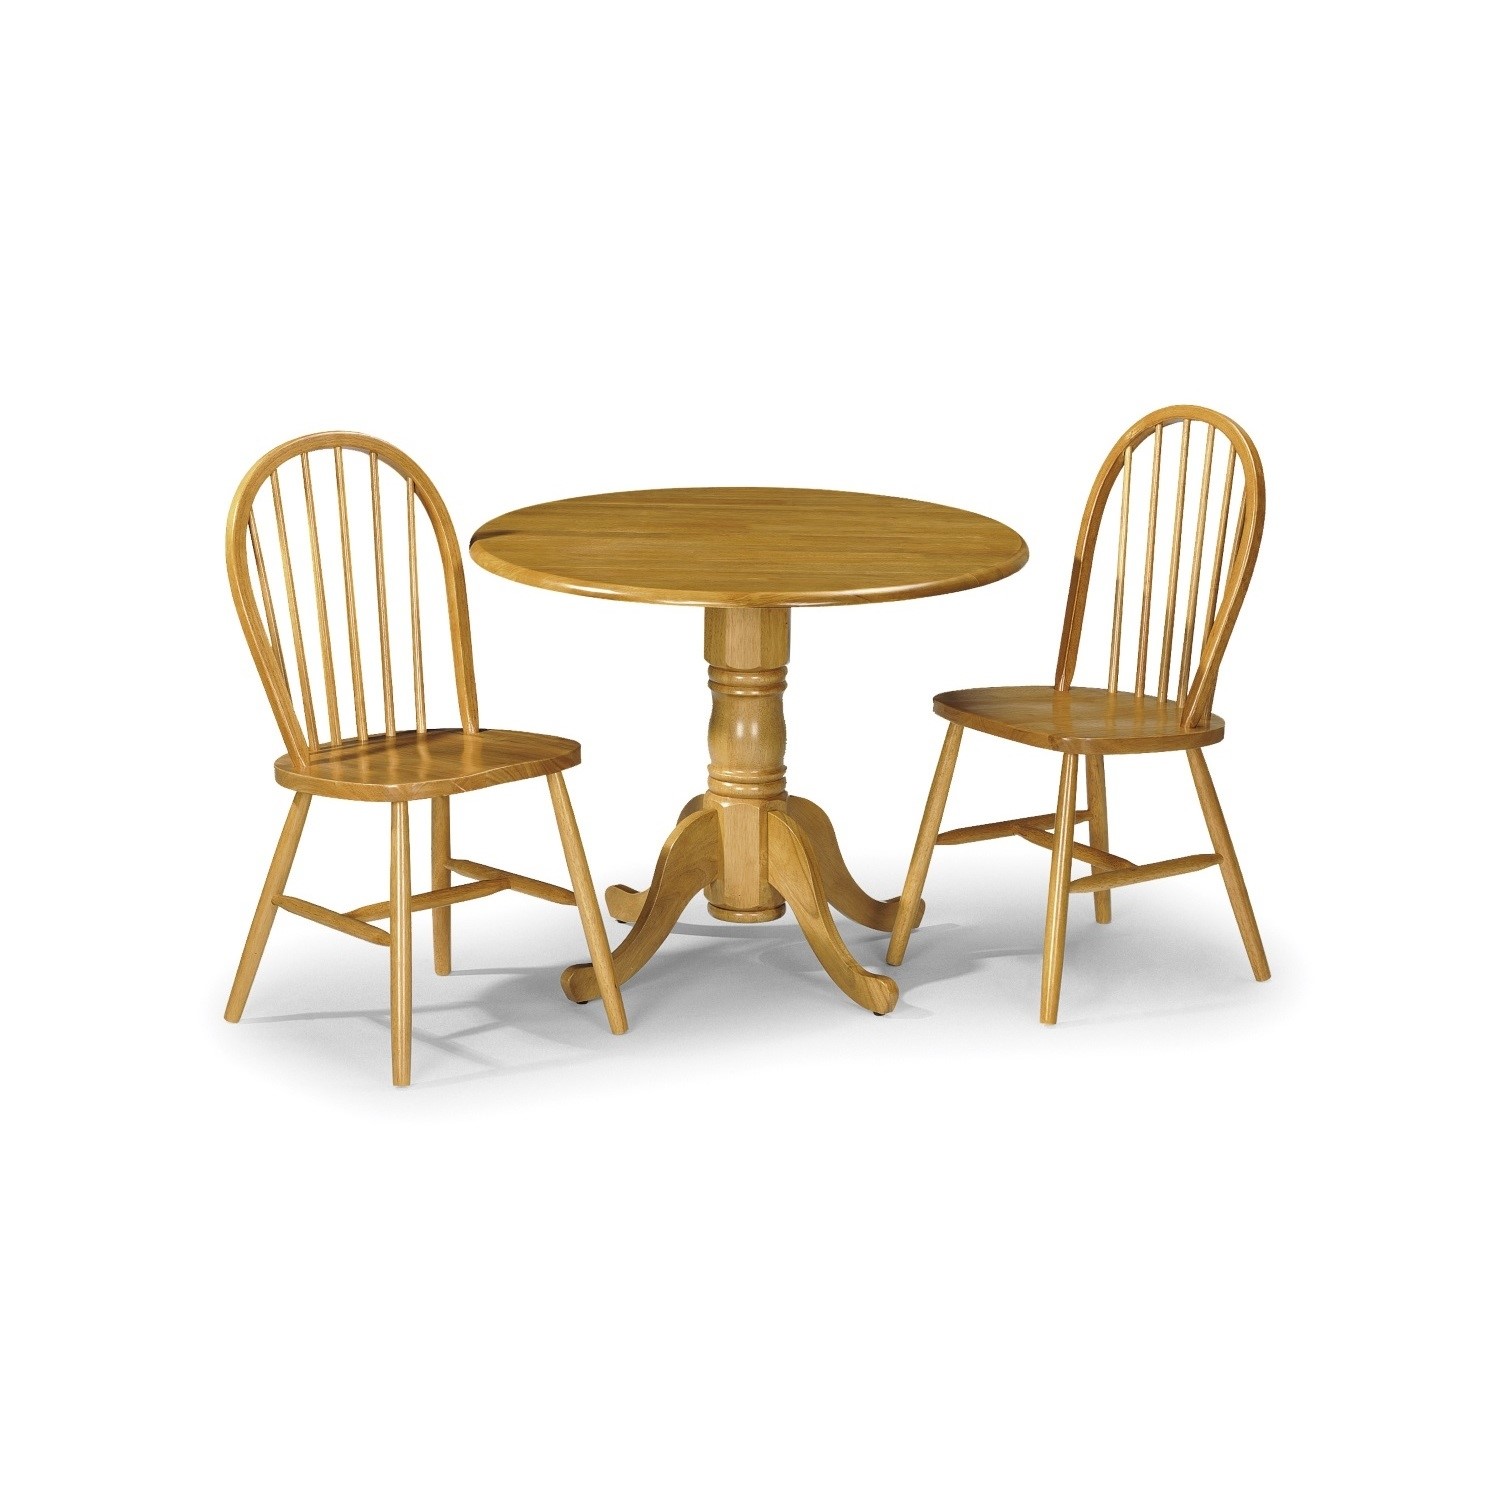 Round Pine Table, Pine Round Table And Chairs For Kitchen